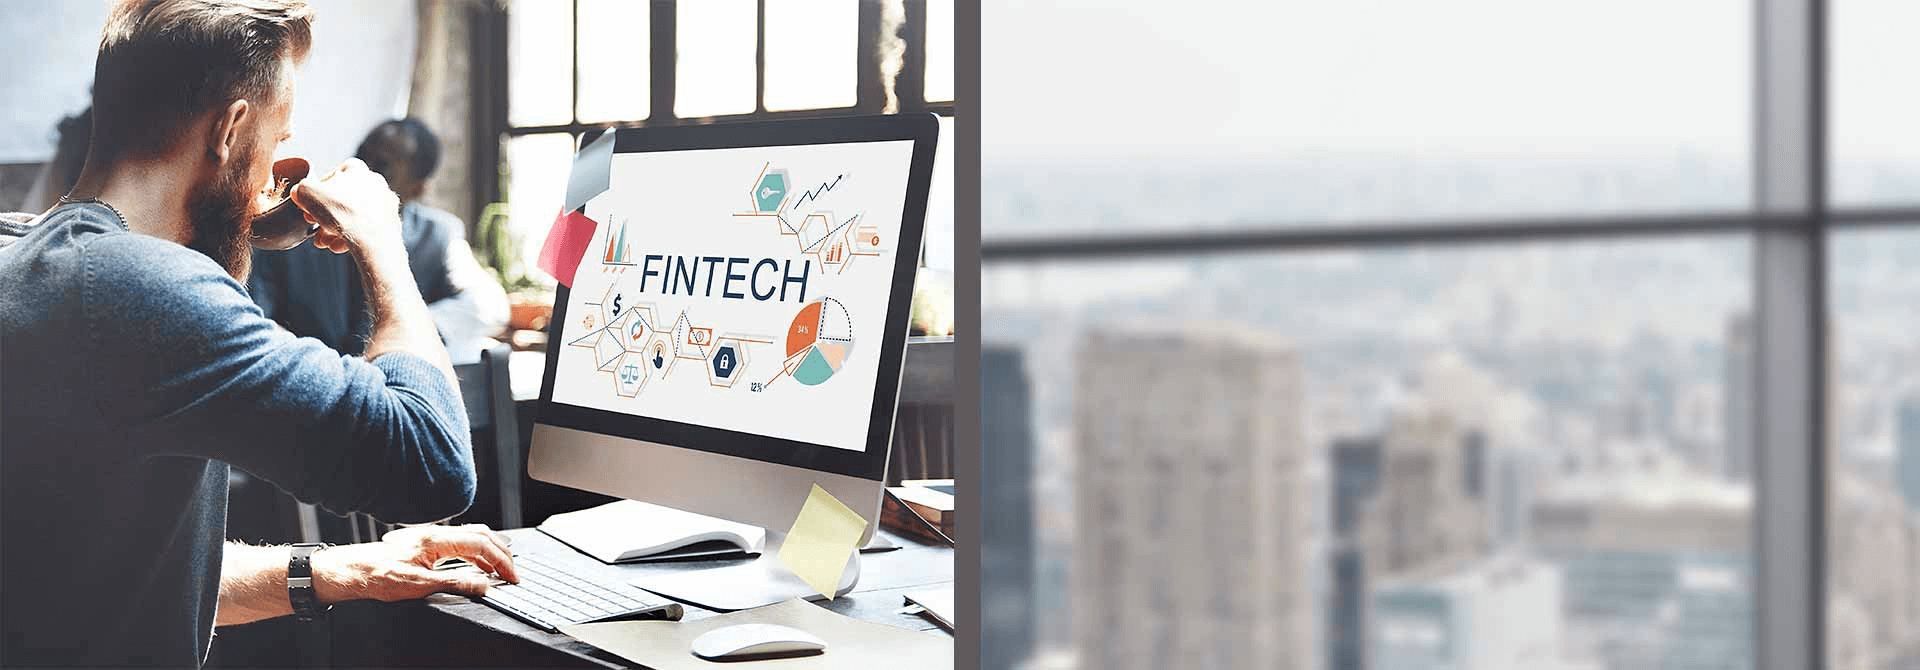 3-Things-We-Could-Learn-From-Fintech-Talents-702868-1